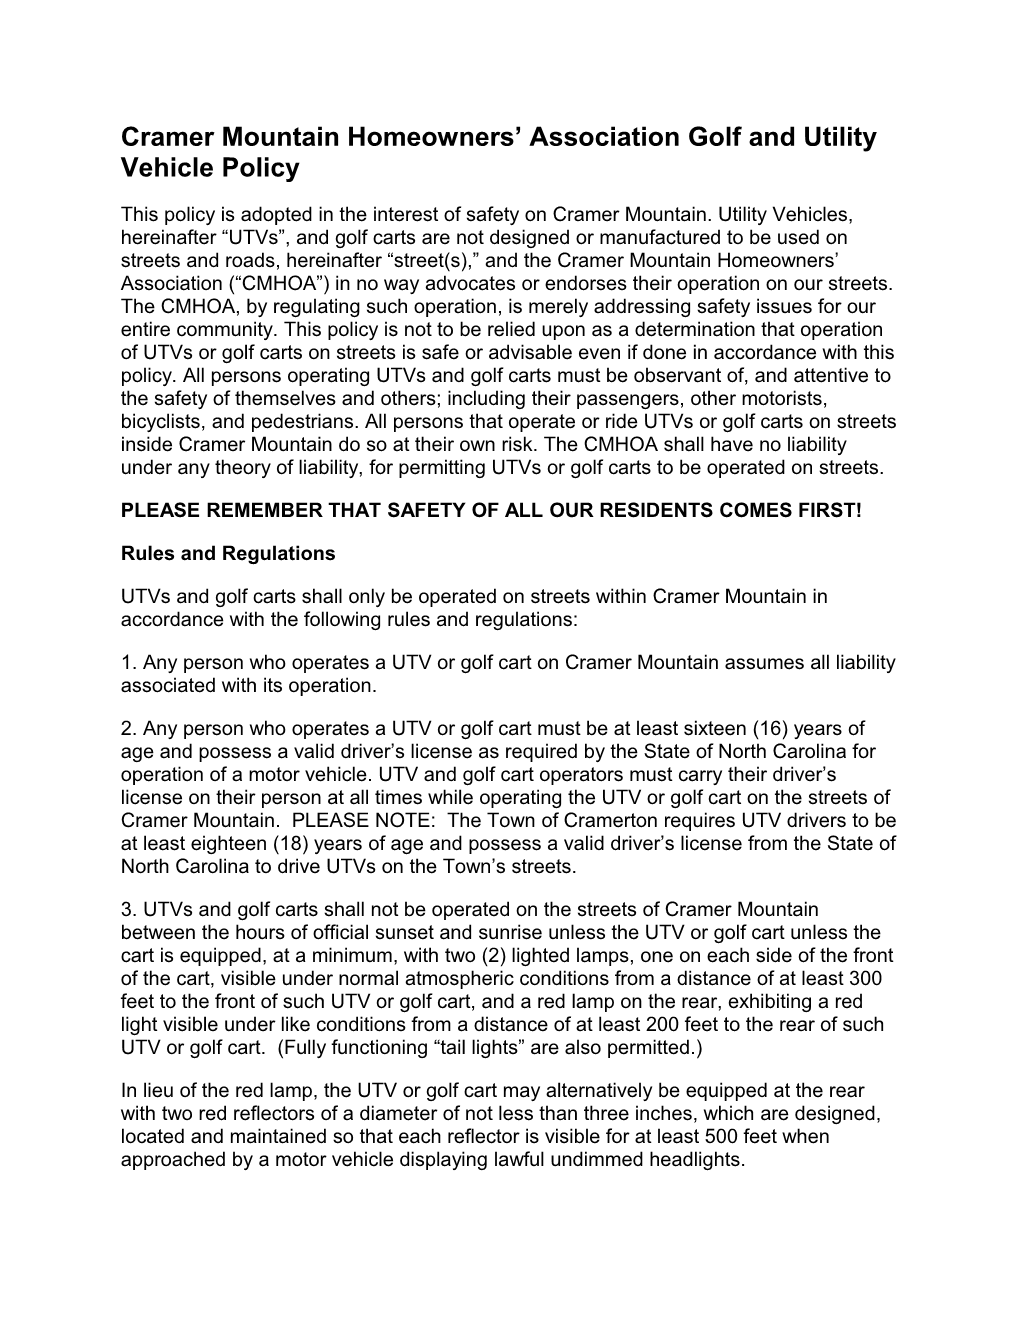 Cramer Mountain Homeowners Association Golf and Utility Vehicle Policy